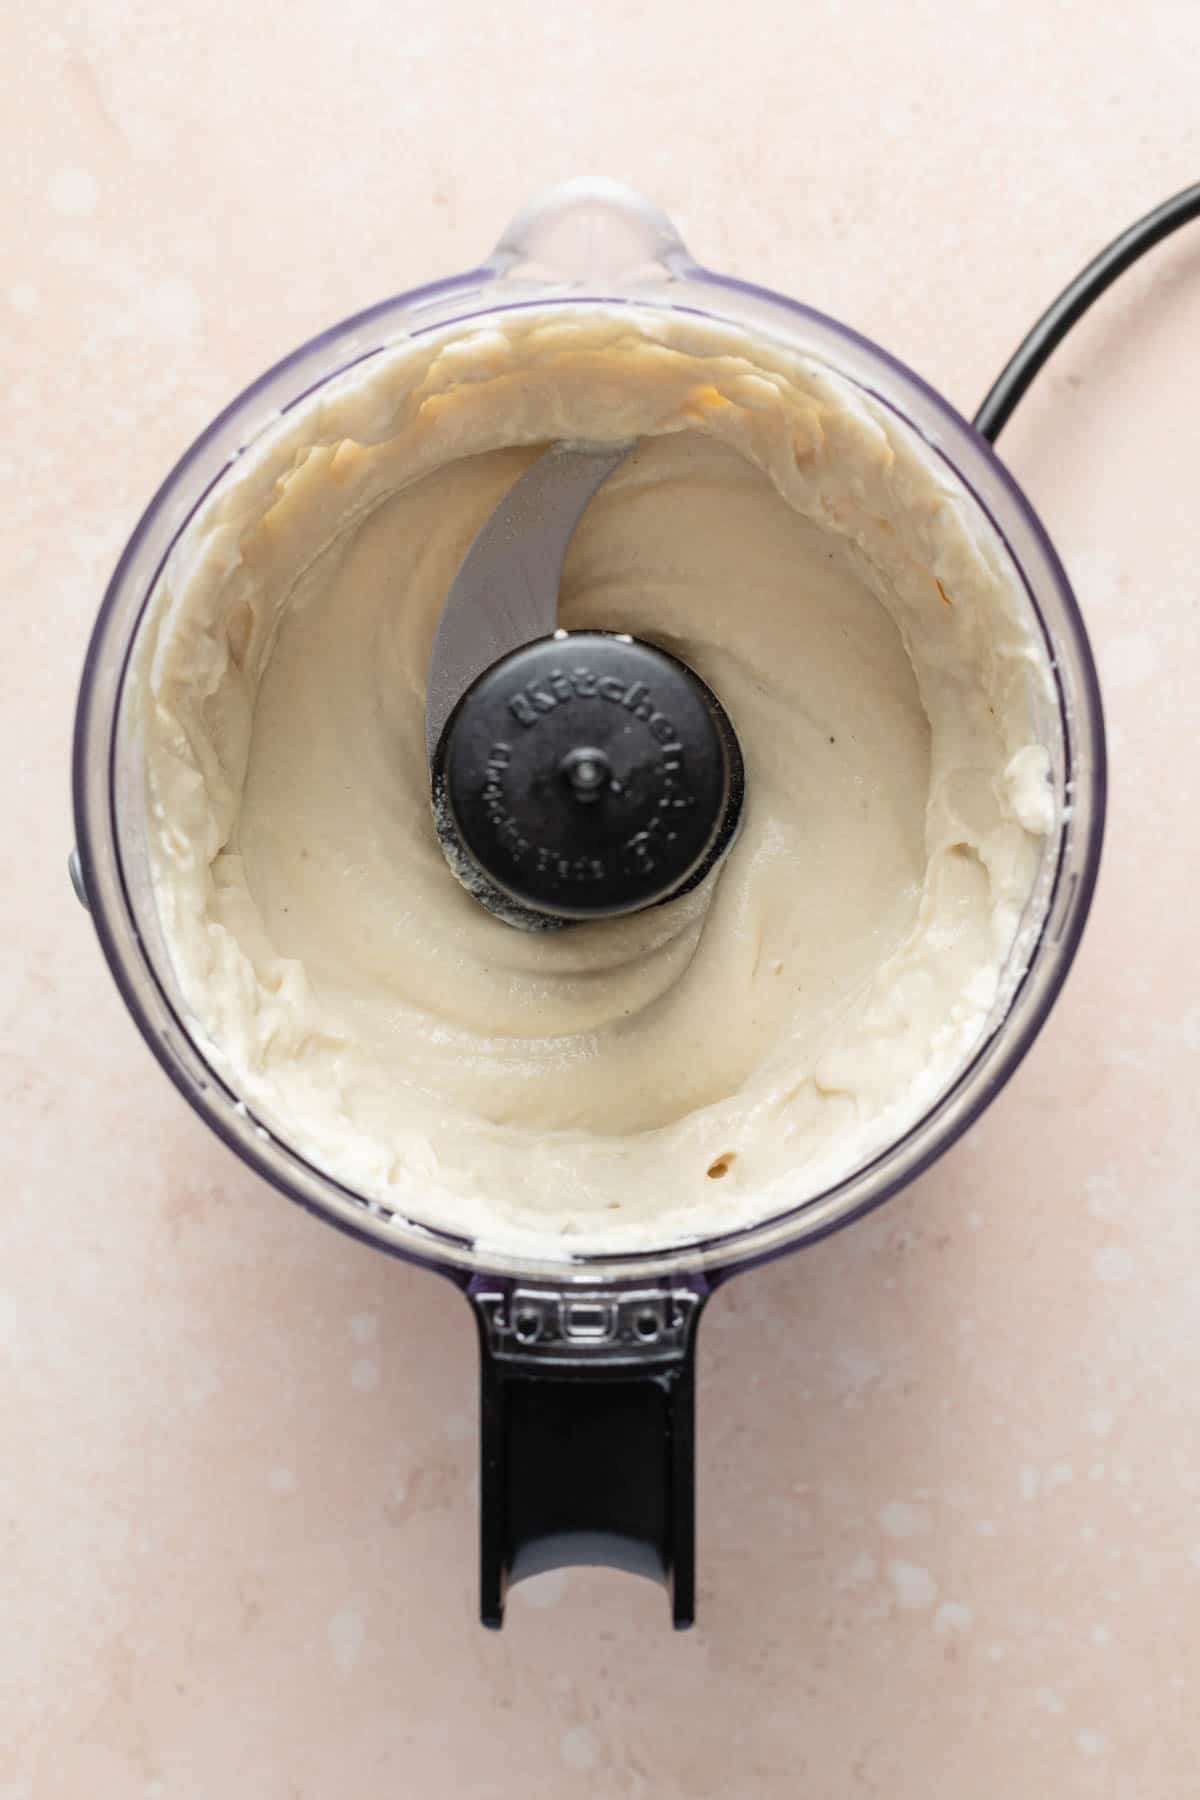 Cashew mayo blended together in a food processor.